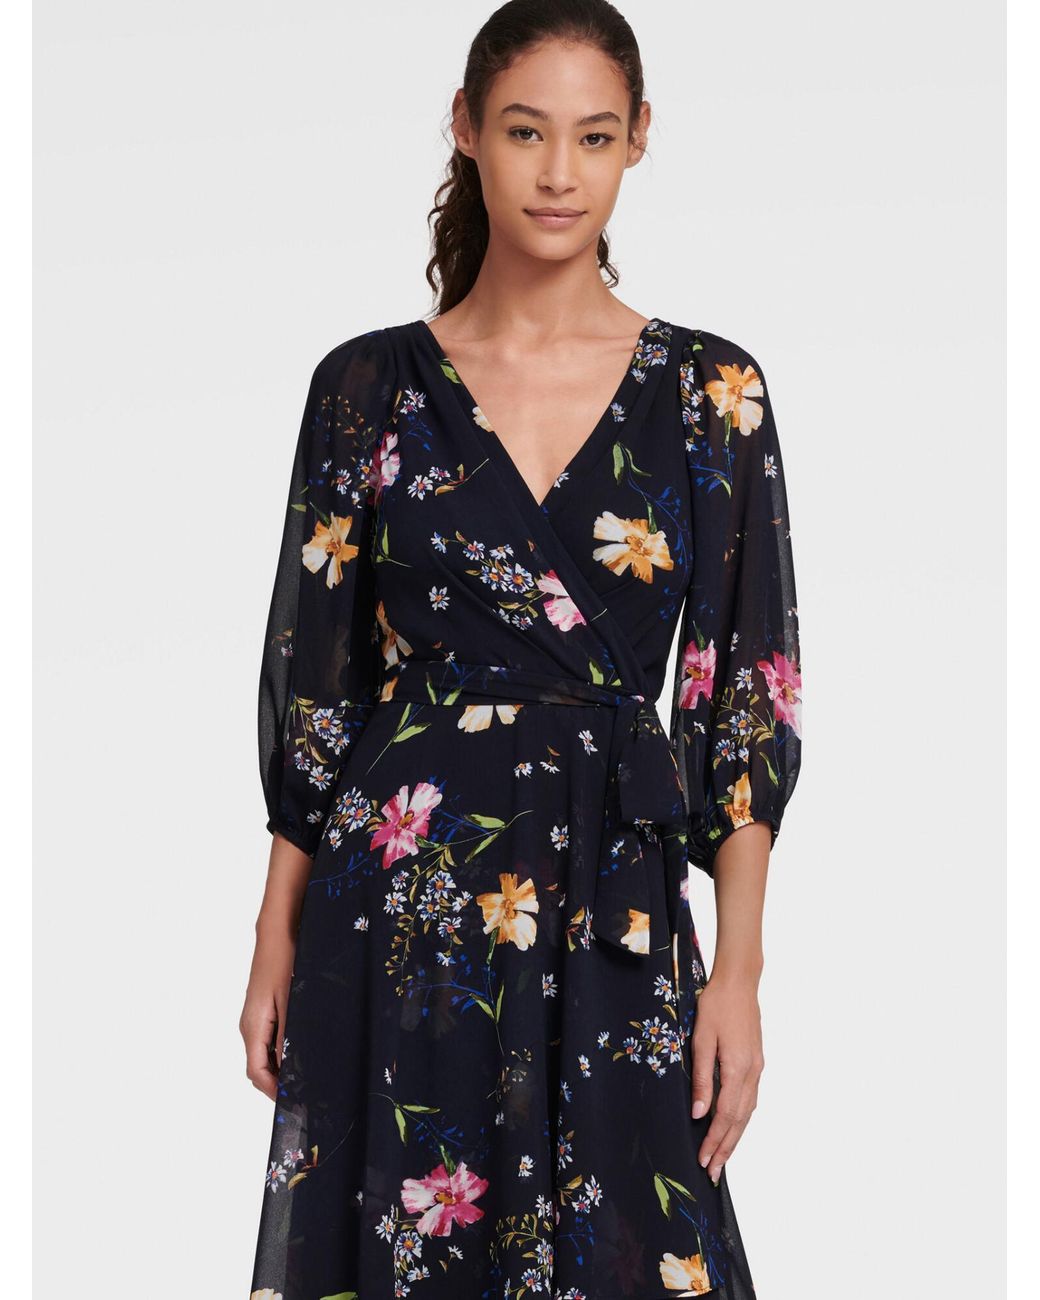 DKNY Floral Faux Wrap Dress With ...